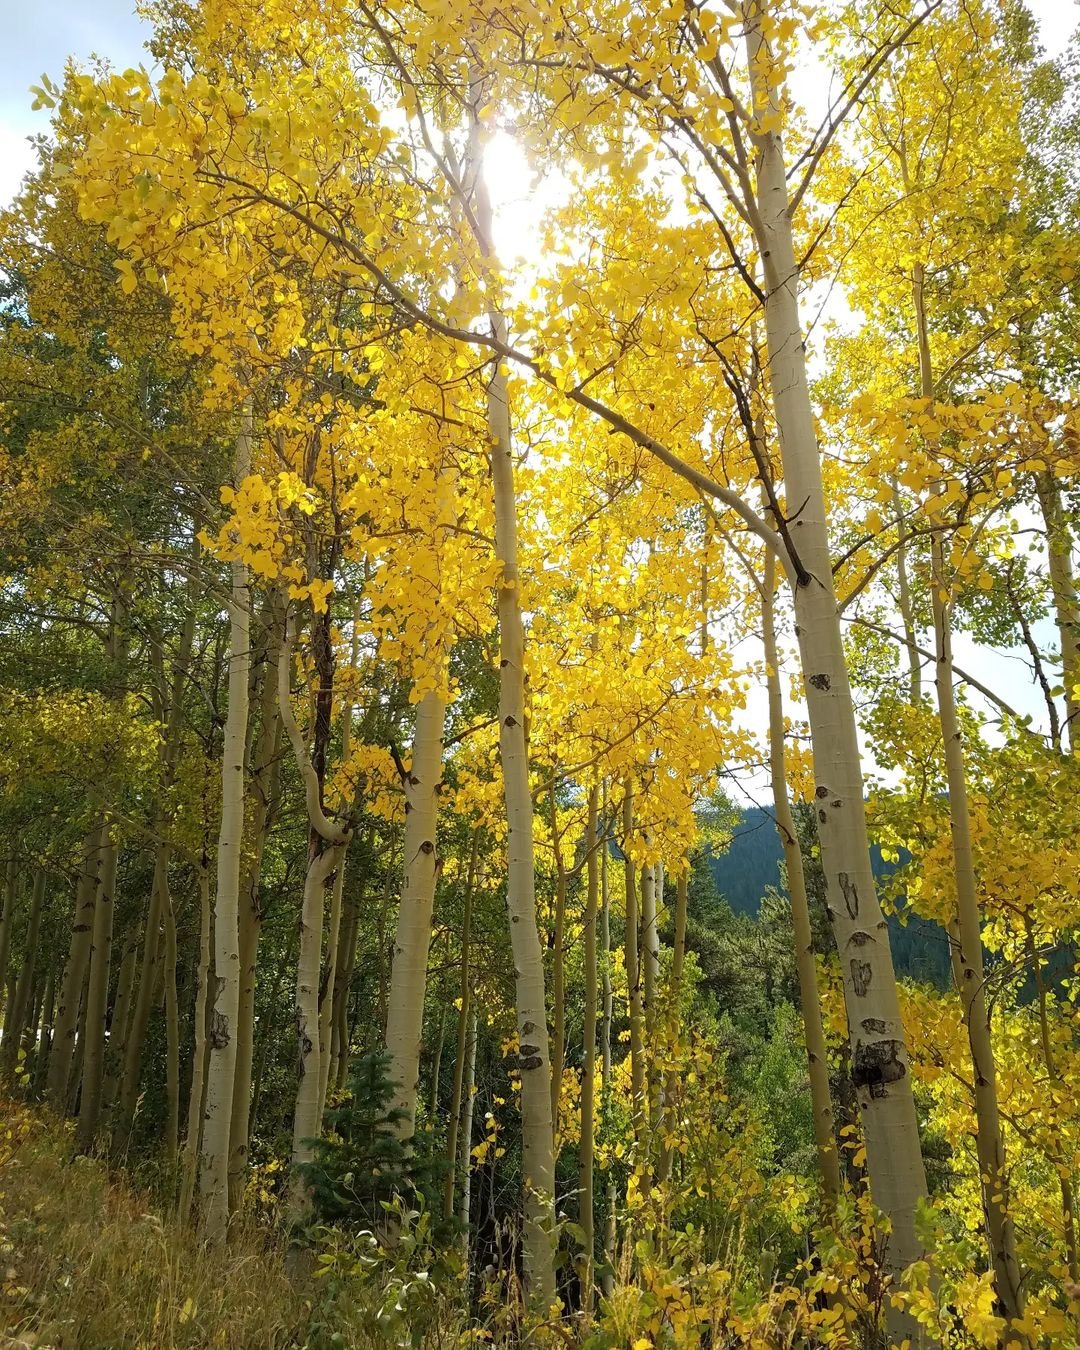 Vibrant autumn foliage of Bigtooth Aspen trees, displaying their golden leaves in a picturesque scene.